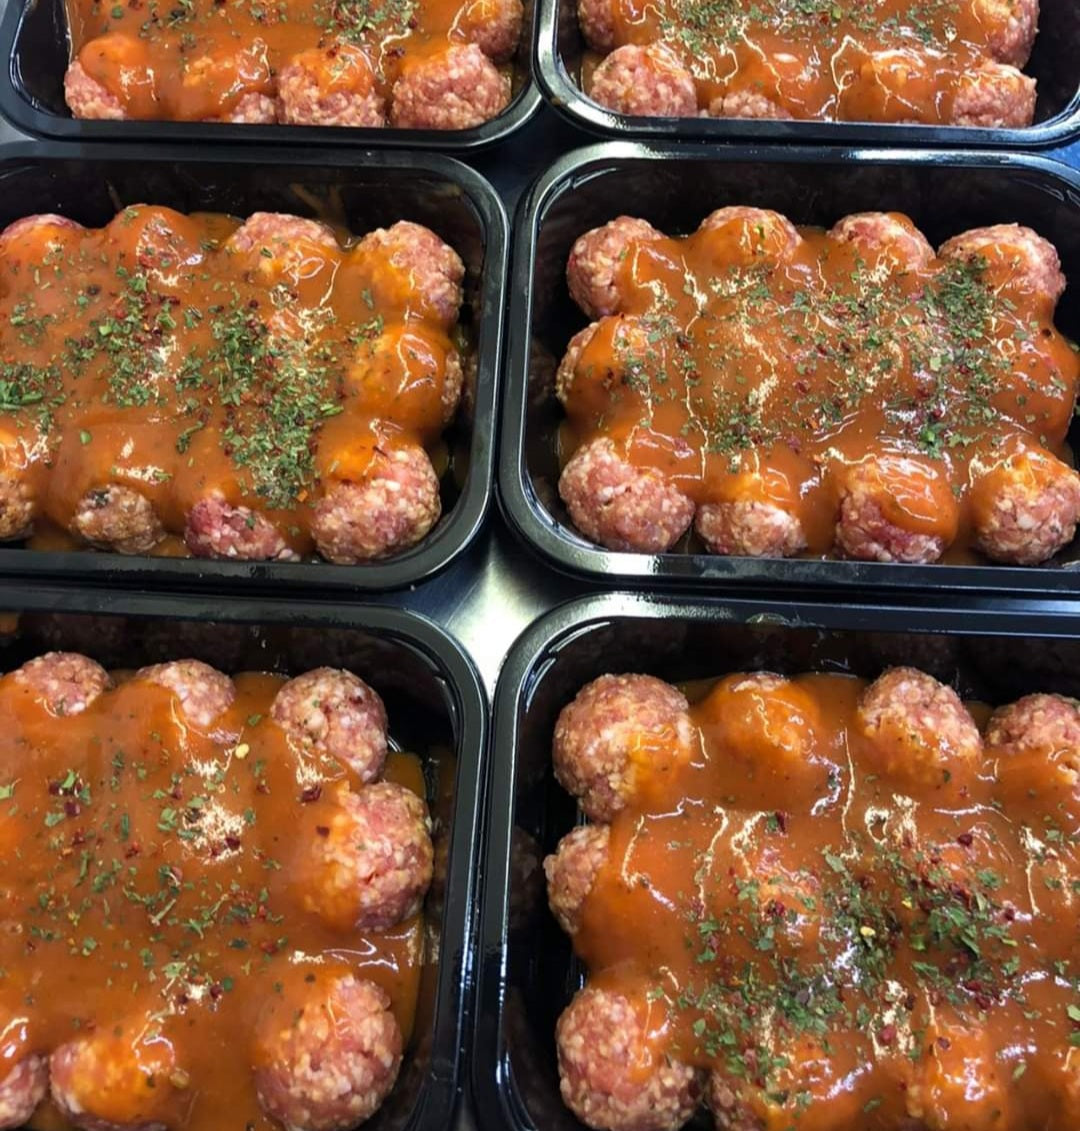 Pork Meatballs in Tomato and Herb Sauce